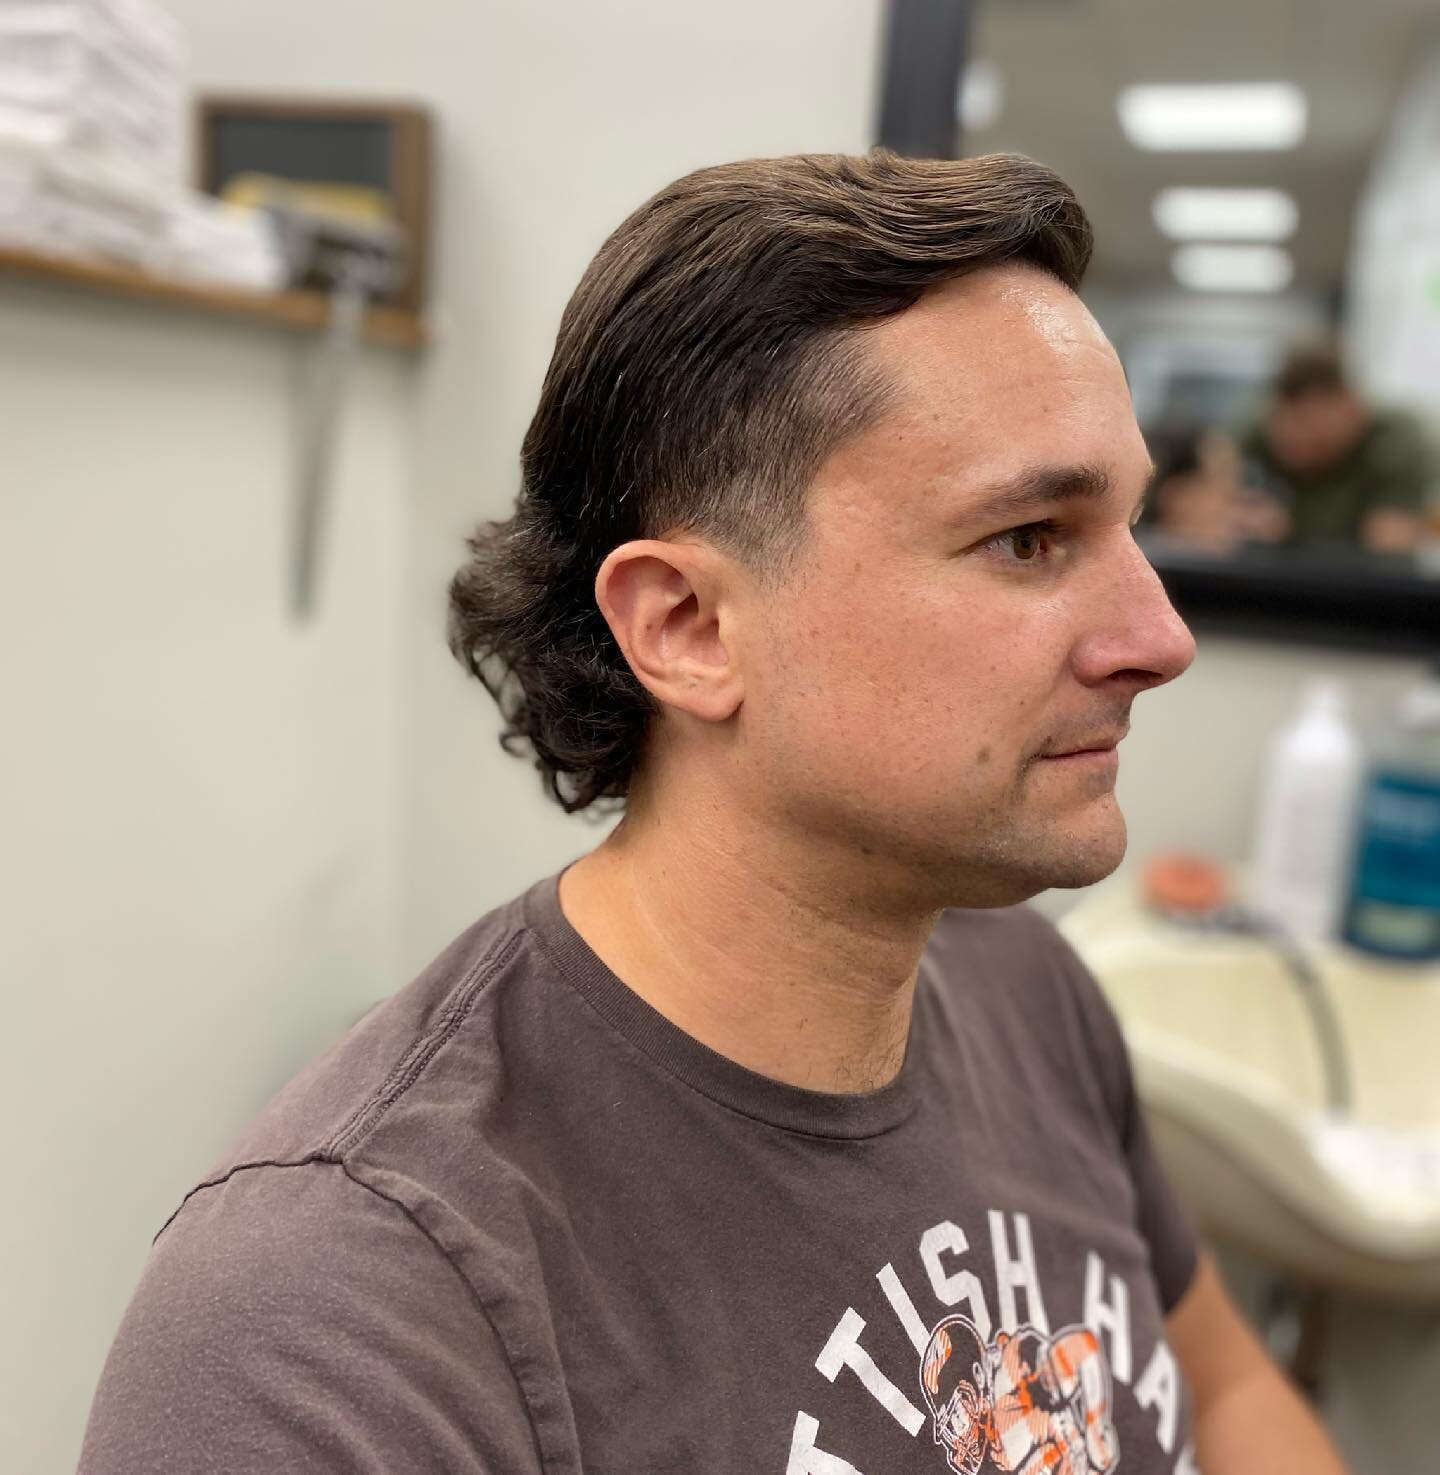 Just sent this animal out into its&rsquo; natural habitat for the weekend. Have a great Independence Day everyone! capitolbarber.com #capitolbarbershopLR #downtown #littlerock #barber #layrite #haircut #straightrazor #hardworkinggentlemen #mullet